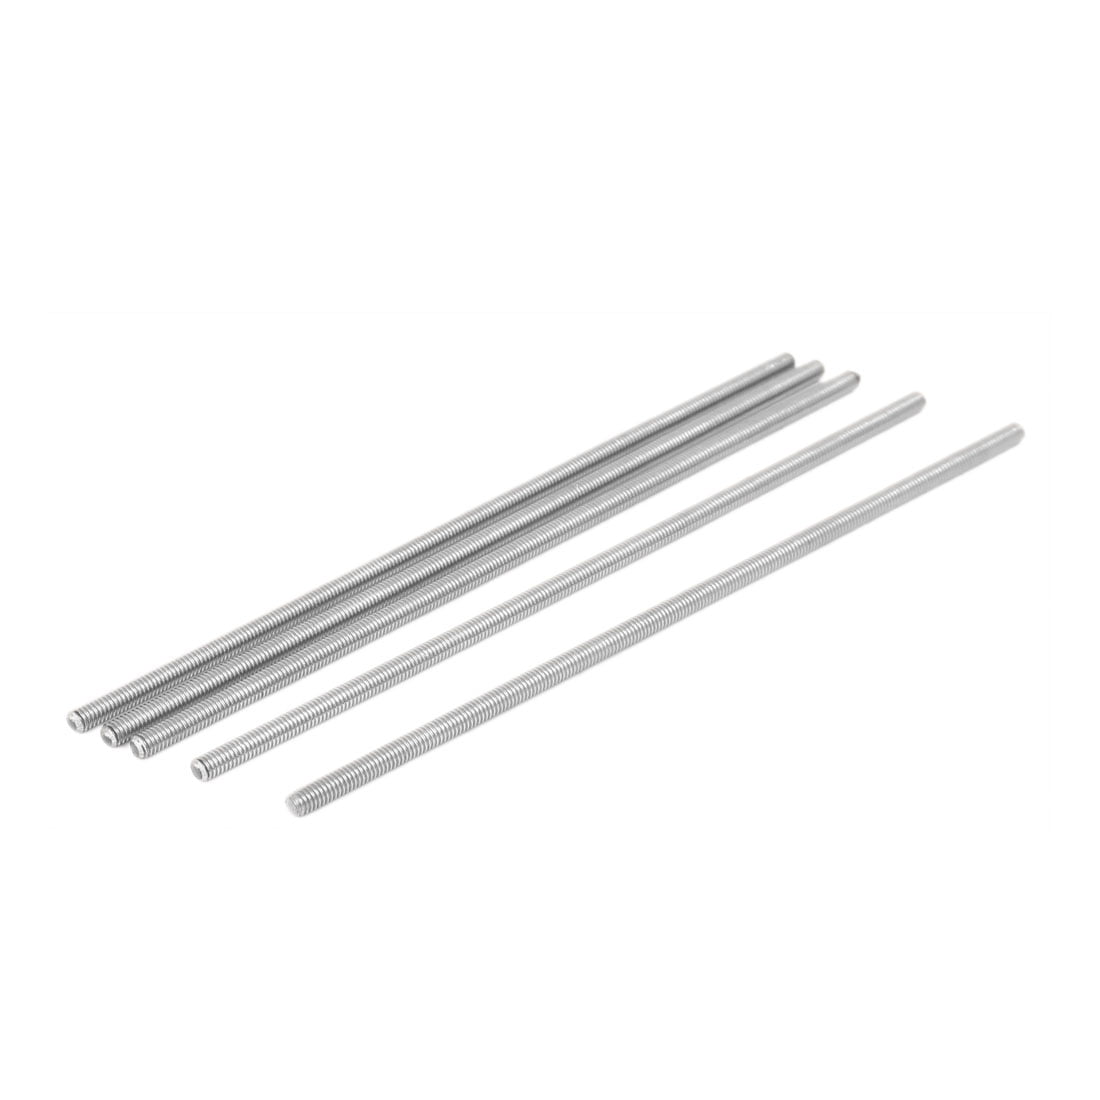 uxcell 6mm x 150mm 304 Stainless Steel Solid Round Rod for DIY Craft 10pcs 